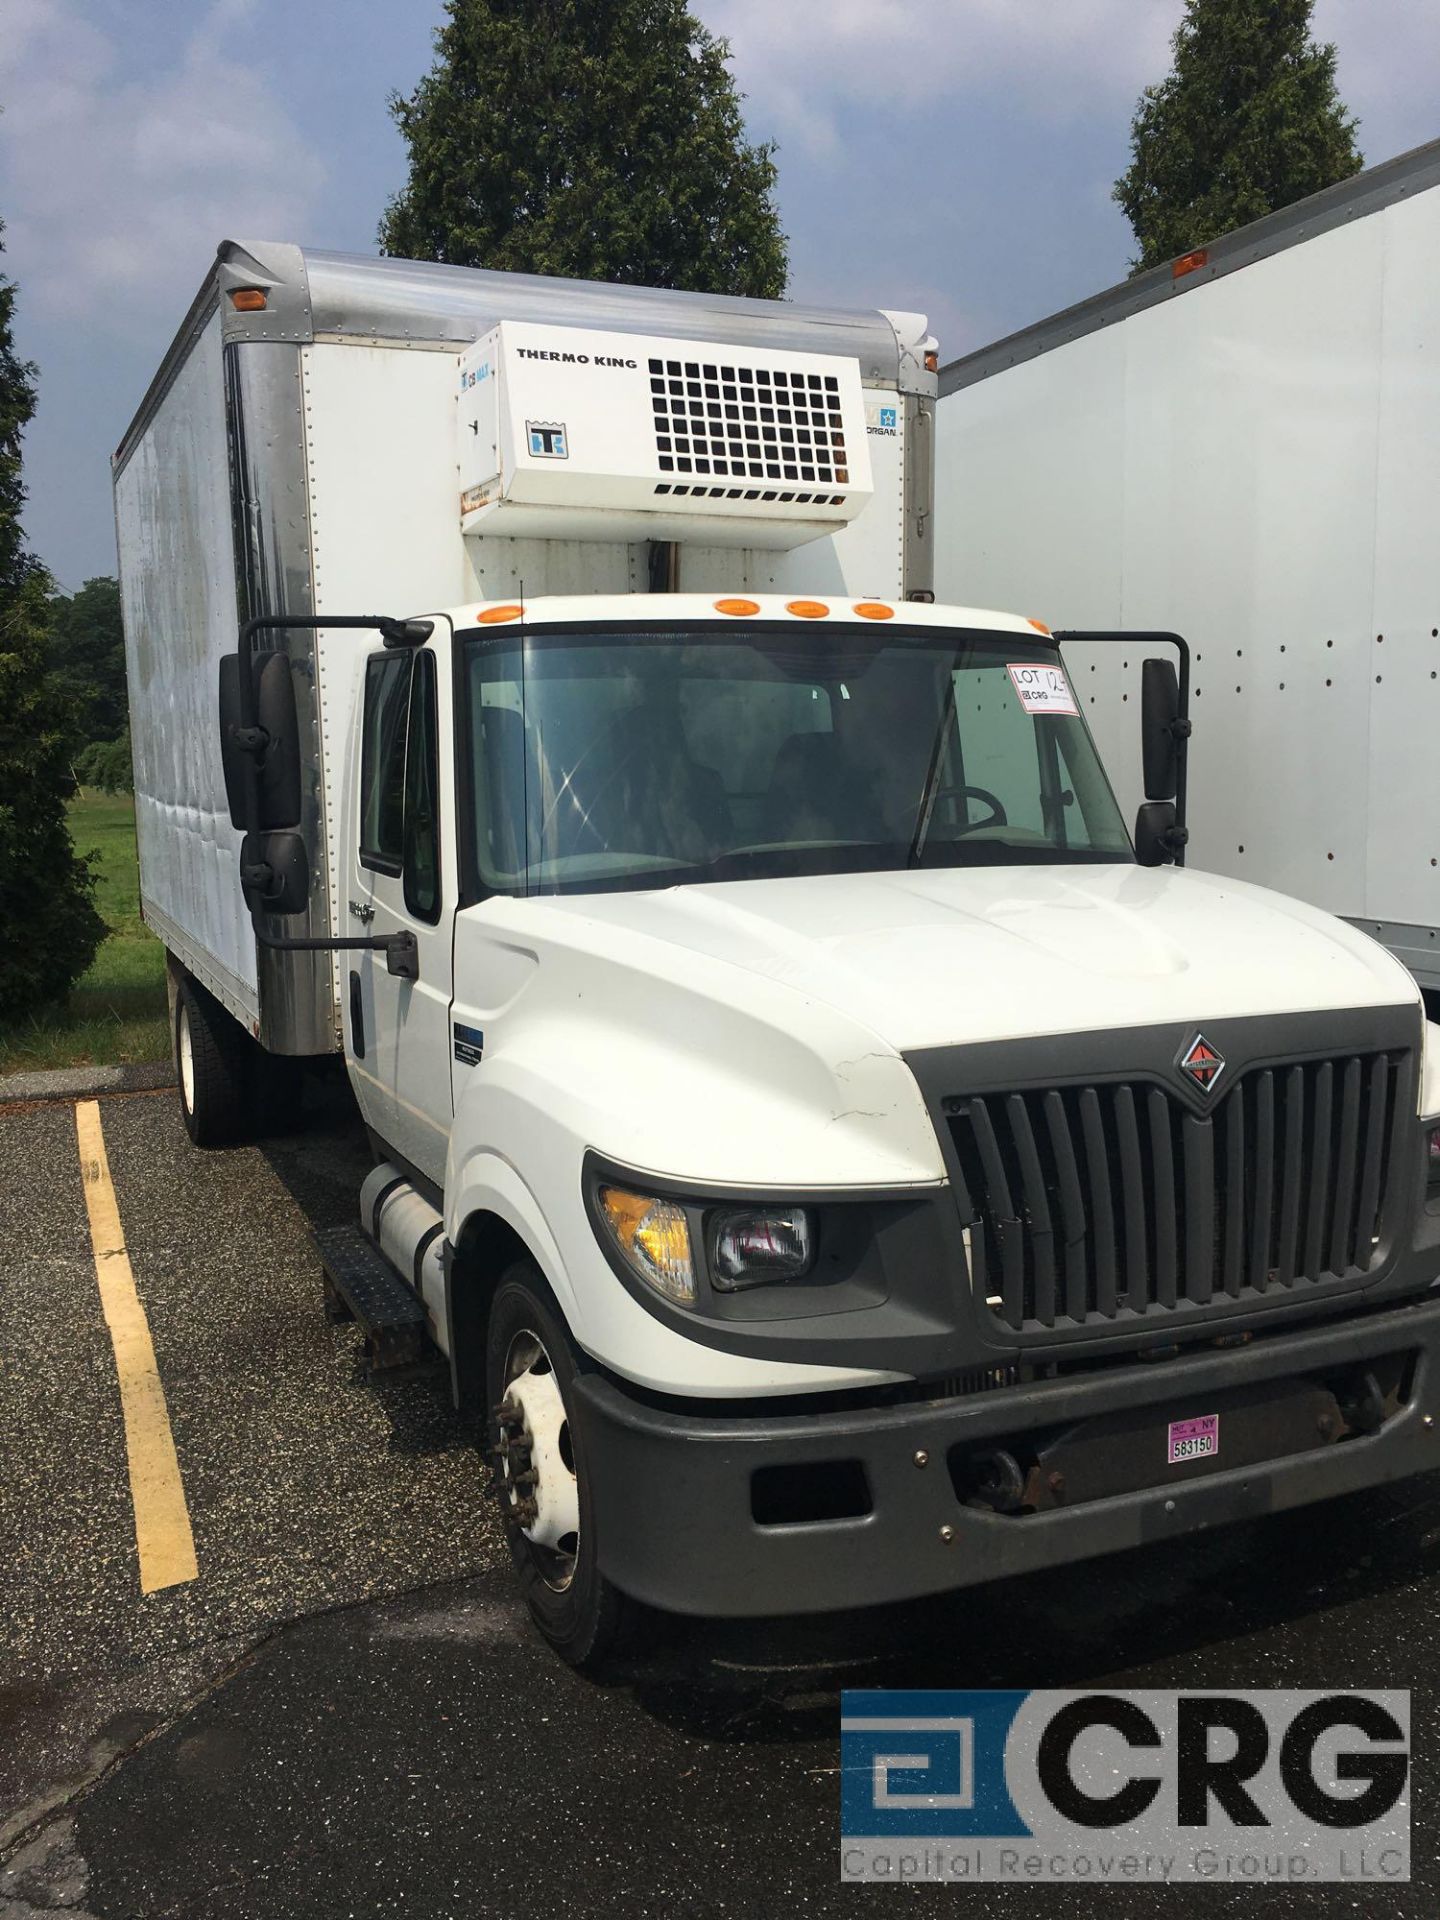 2012 International TerraStar Refrigerated Box Truck, Automatic Transmission, 167,000 miles, Thermo - Image 2 of 6